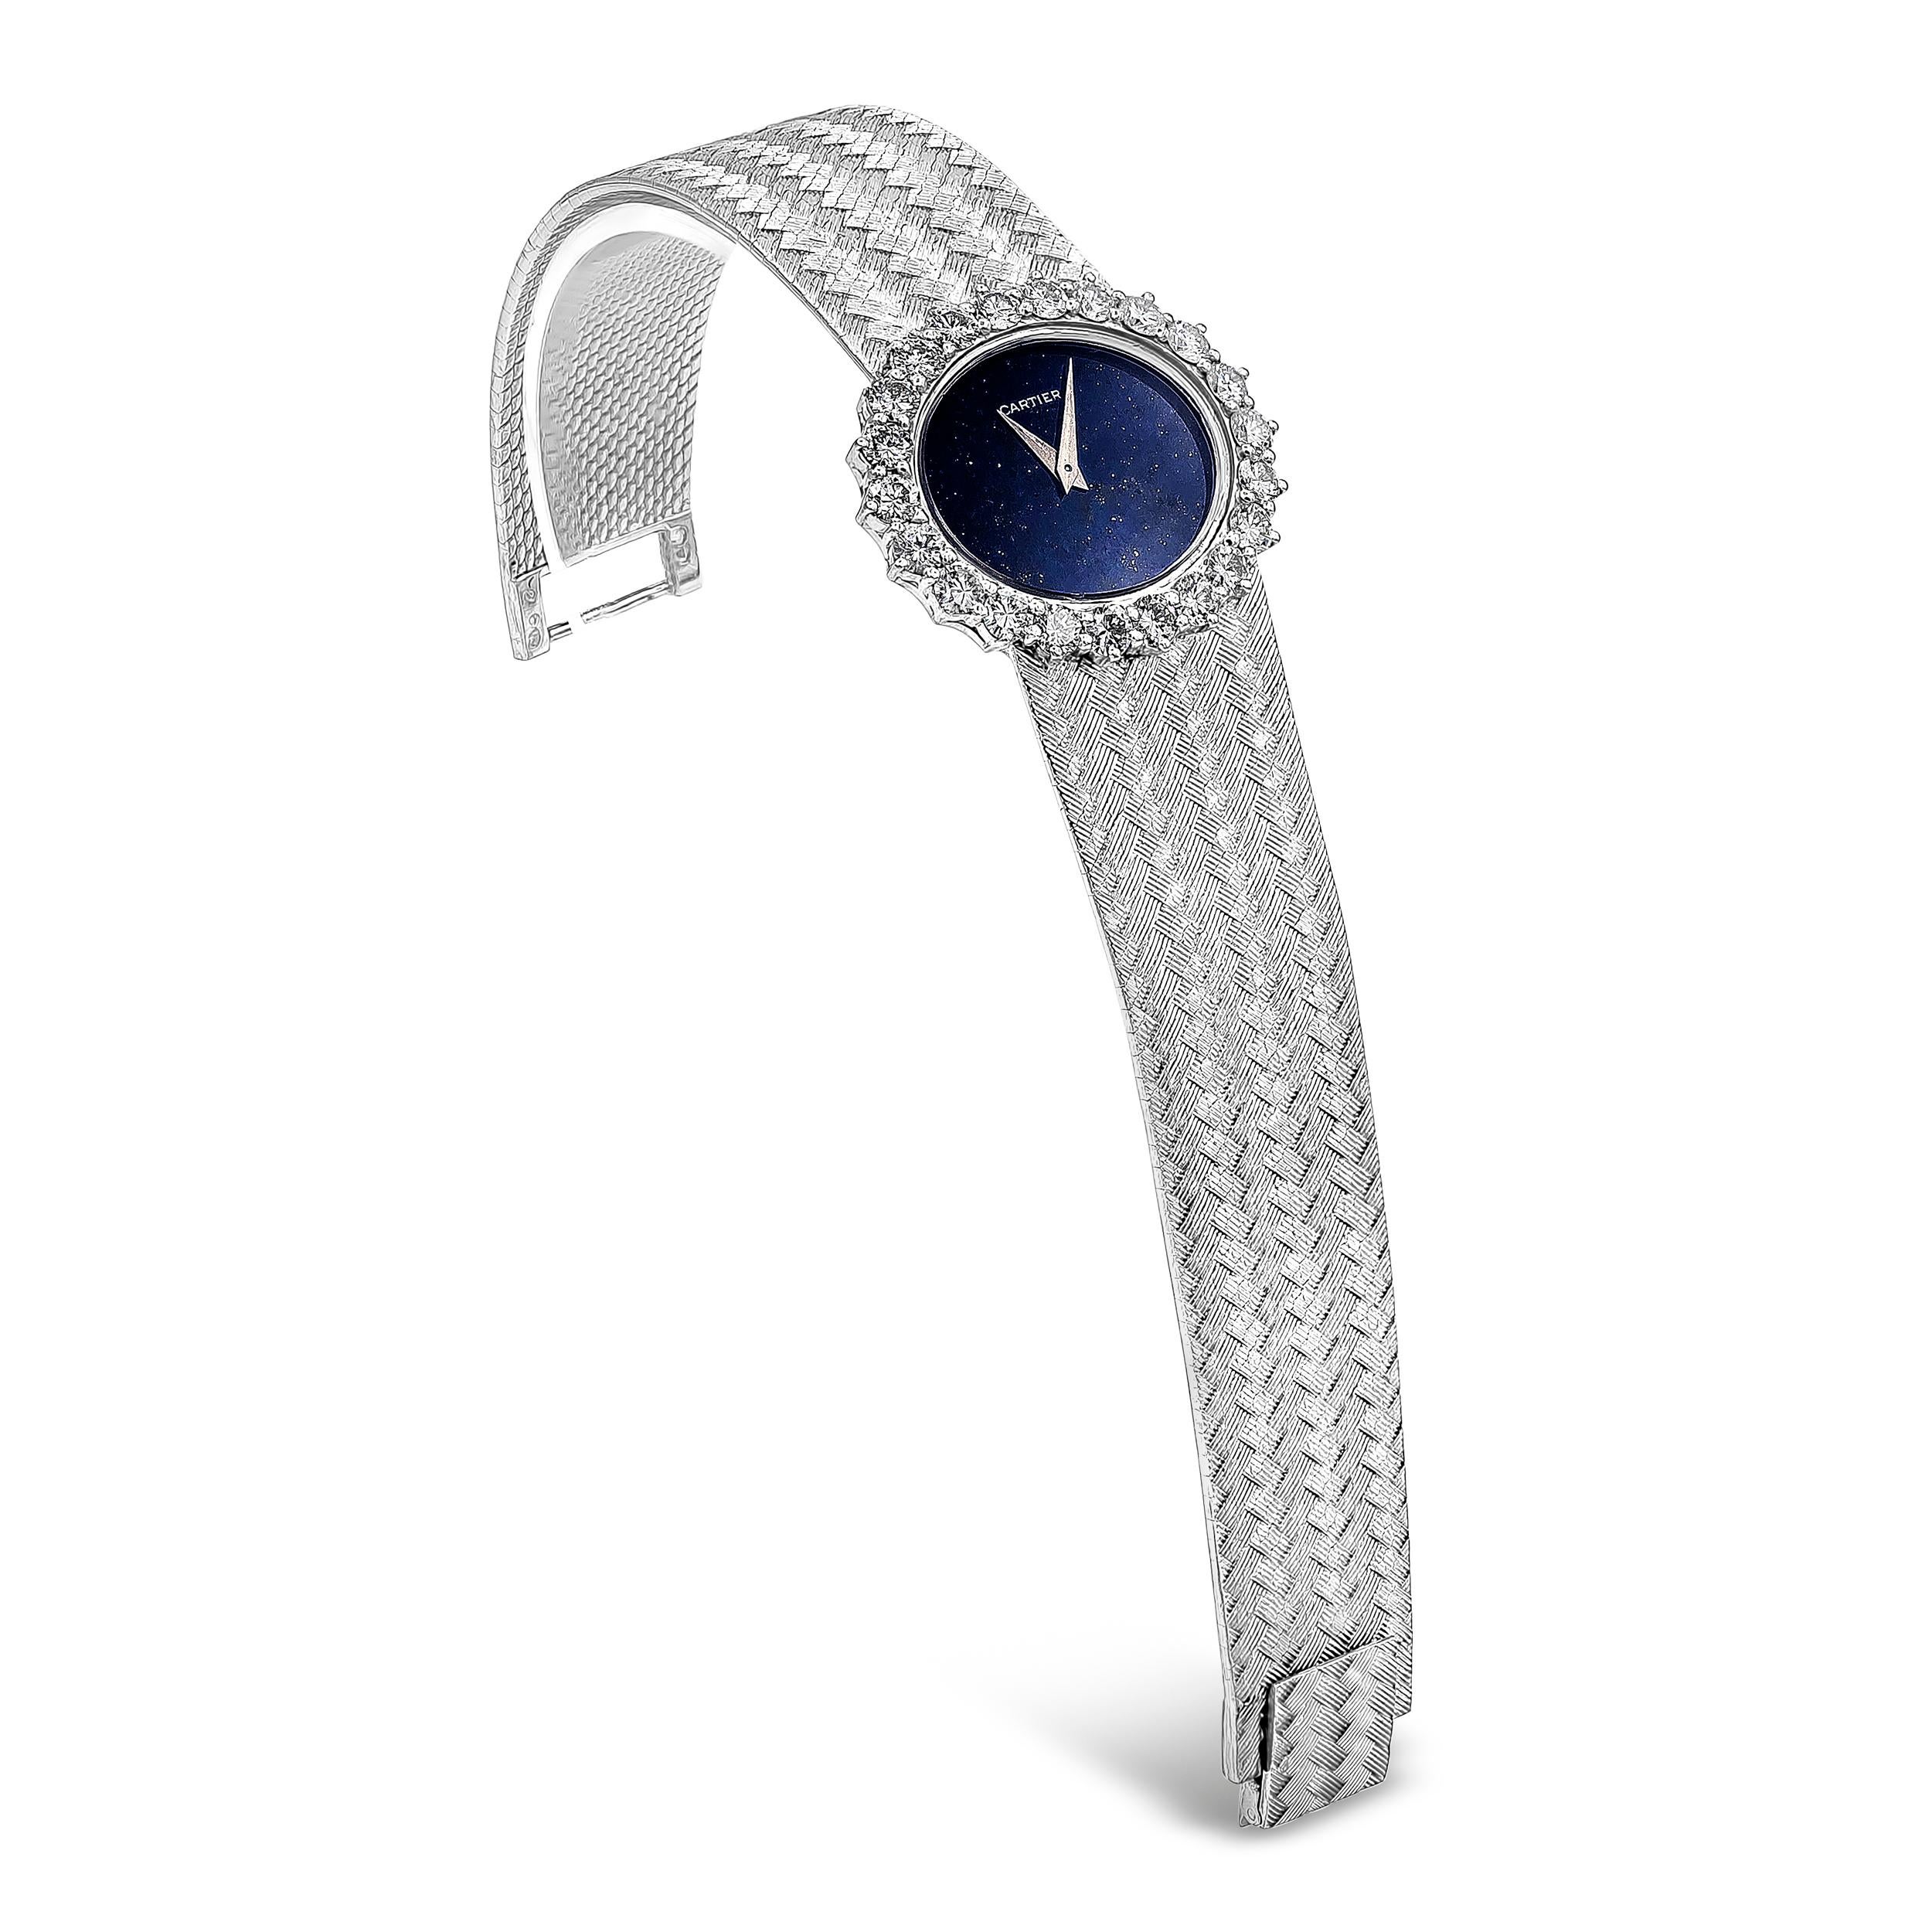 A rare limited edition Cartier by Piaget watch showcasing a lapis lazuli dial and a brilliant diamond bezel. Diamonds are approximately 2.50 carats total weight, F color, VS clarity. Set in a weave design bracelet made in 18K white gold. Mechanical